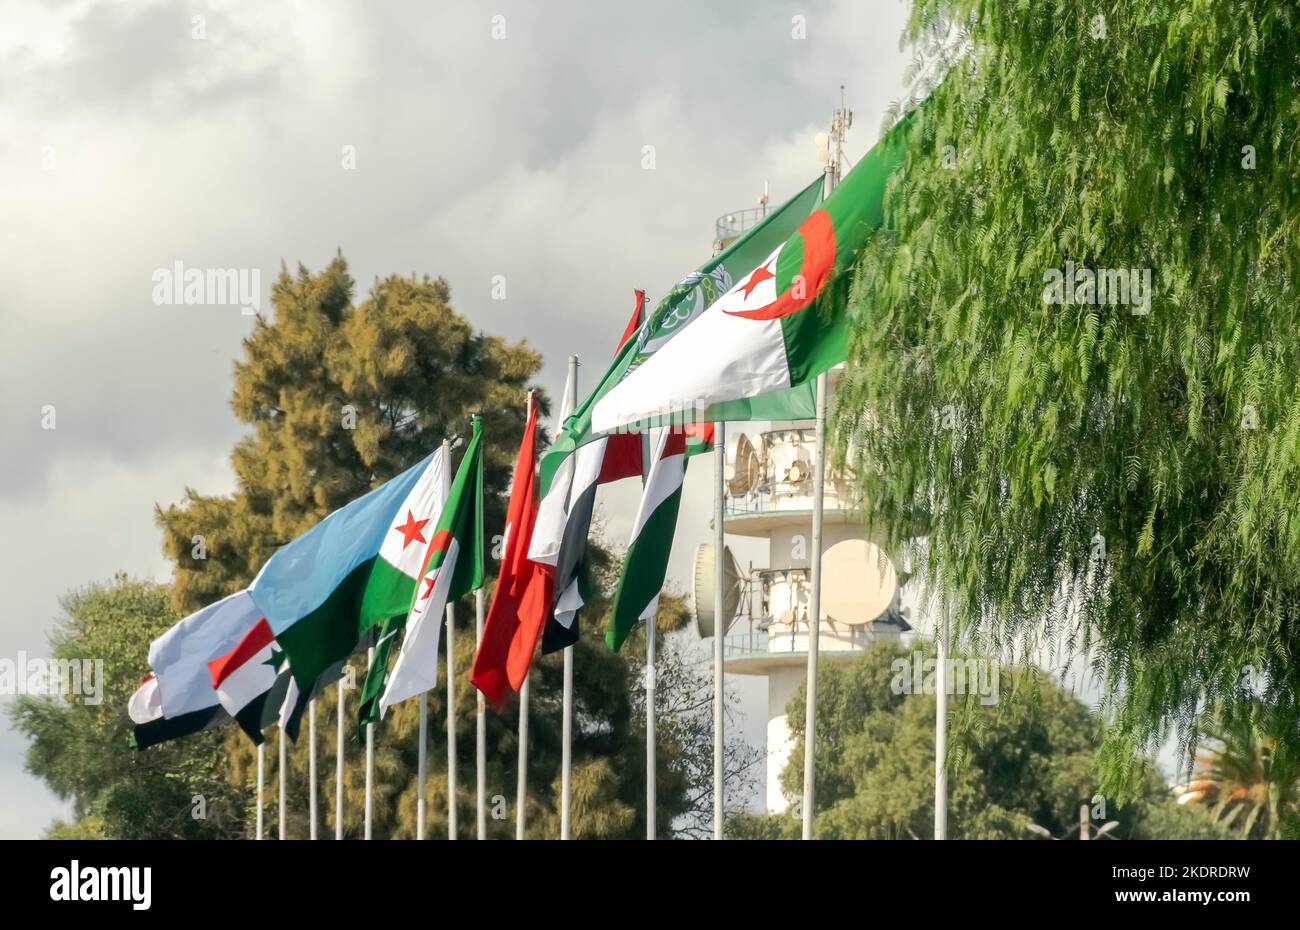 Flags of Algeria, the Arab League and Arab countries flag waving in the wind outside Algiers city with flagposts under a blue cloudy sky and trees. Stock Photo